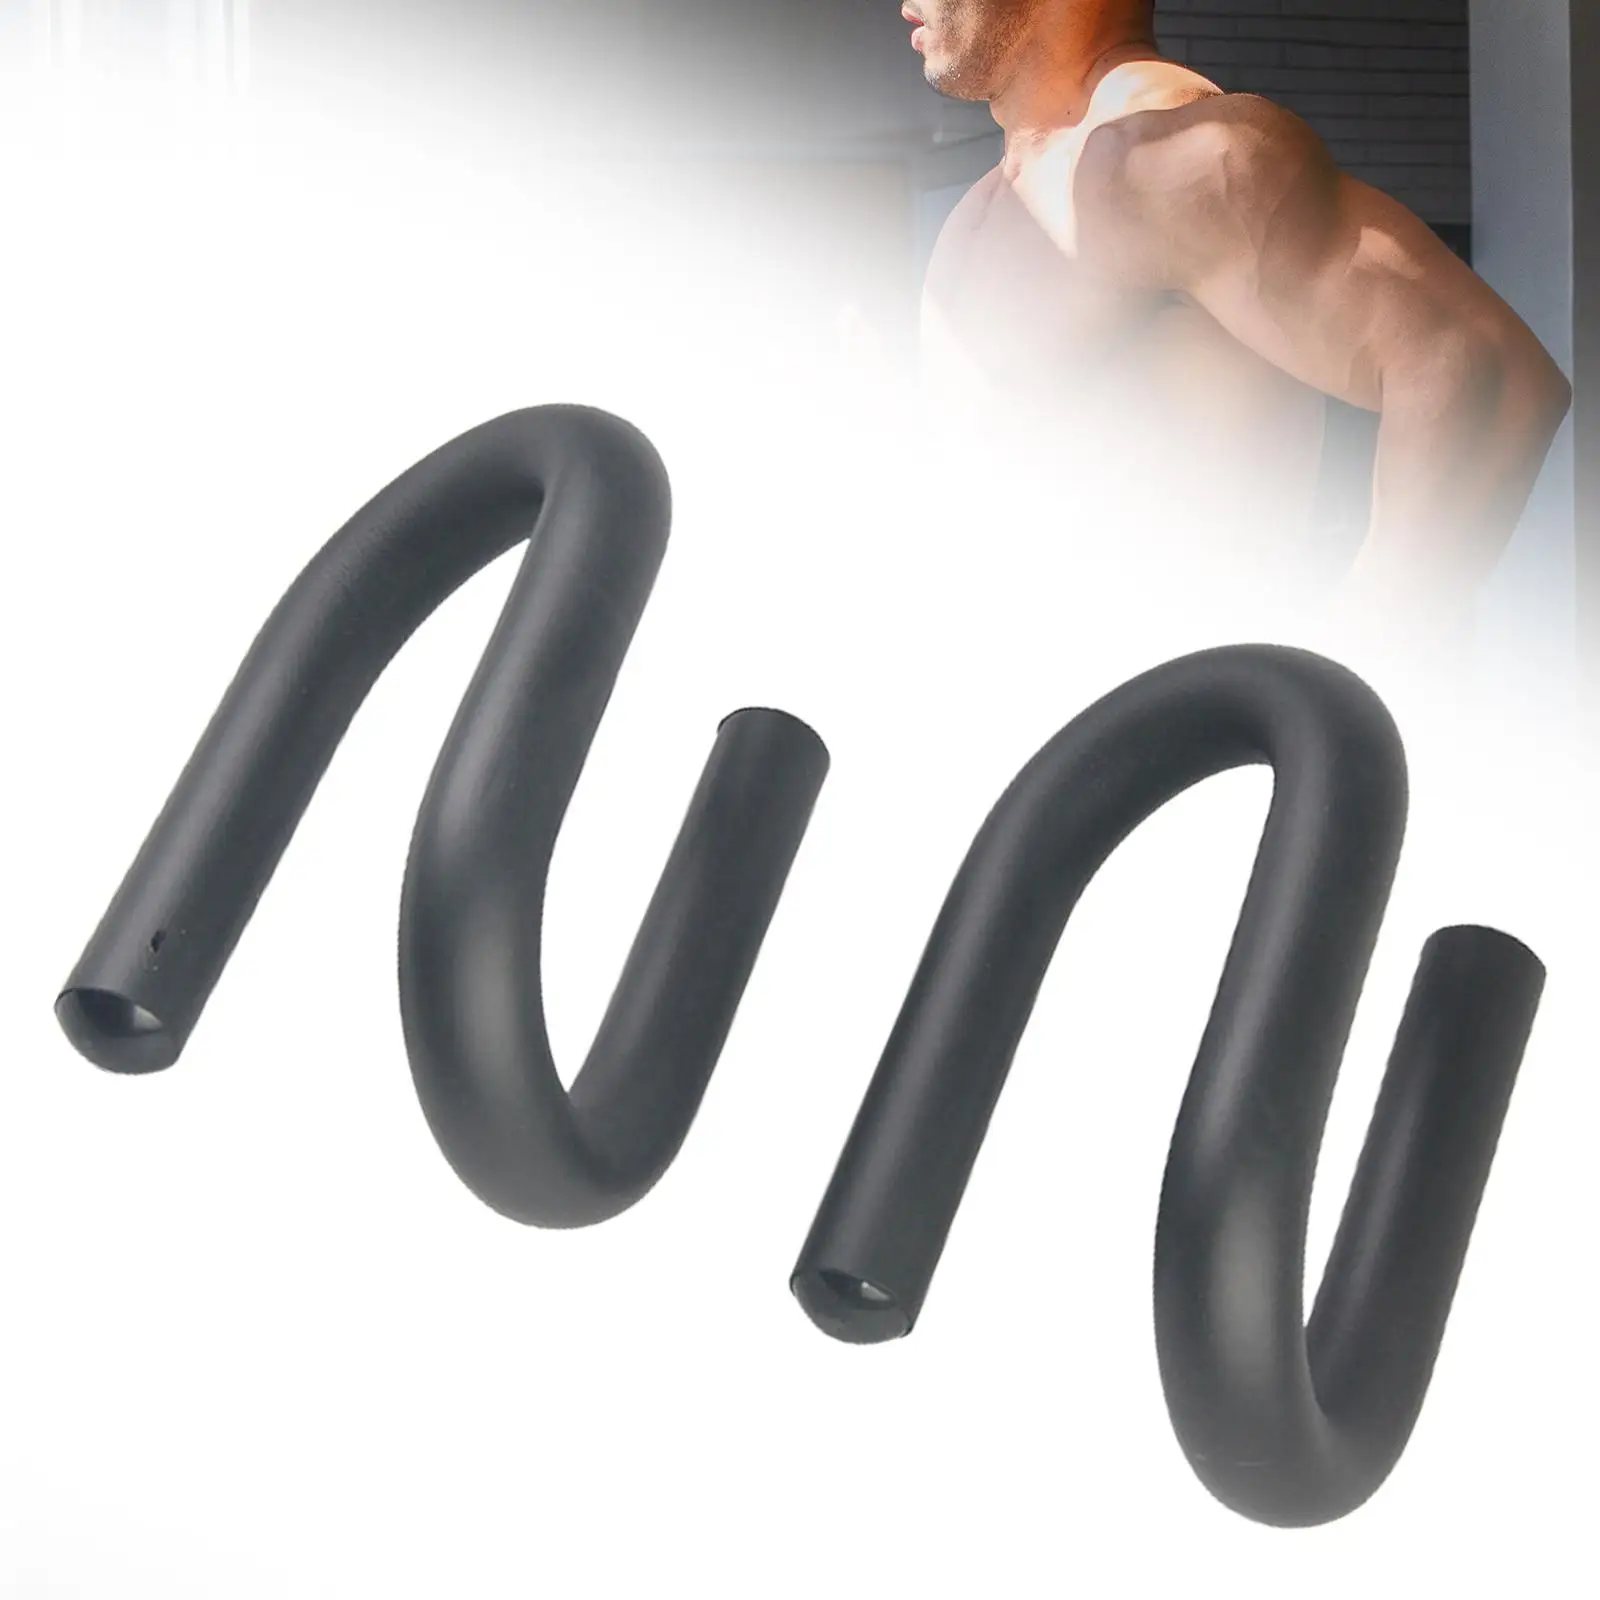 S Shape Push up Bar for Floor Metal Sponge Grip Equipment Steel Pipe Push up Rack for Home Gym Strength Training Workout